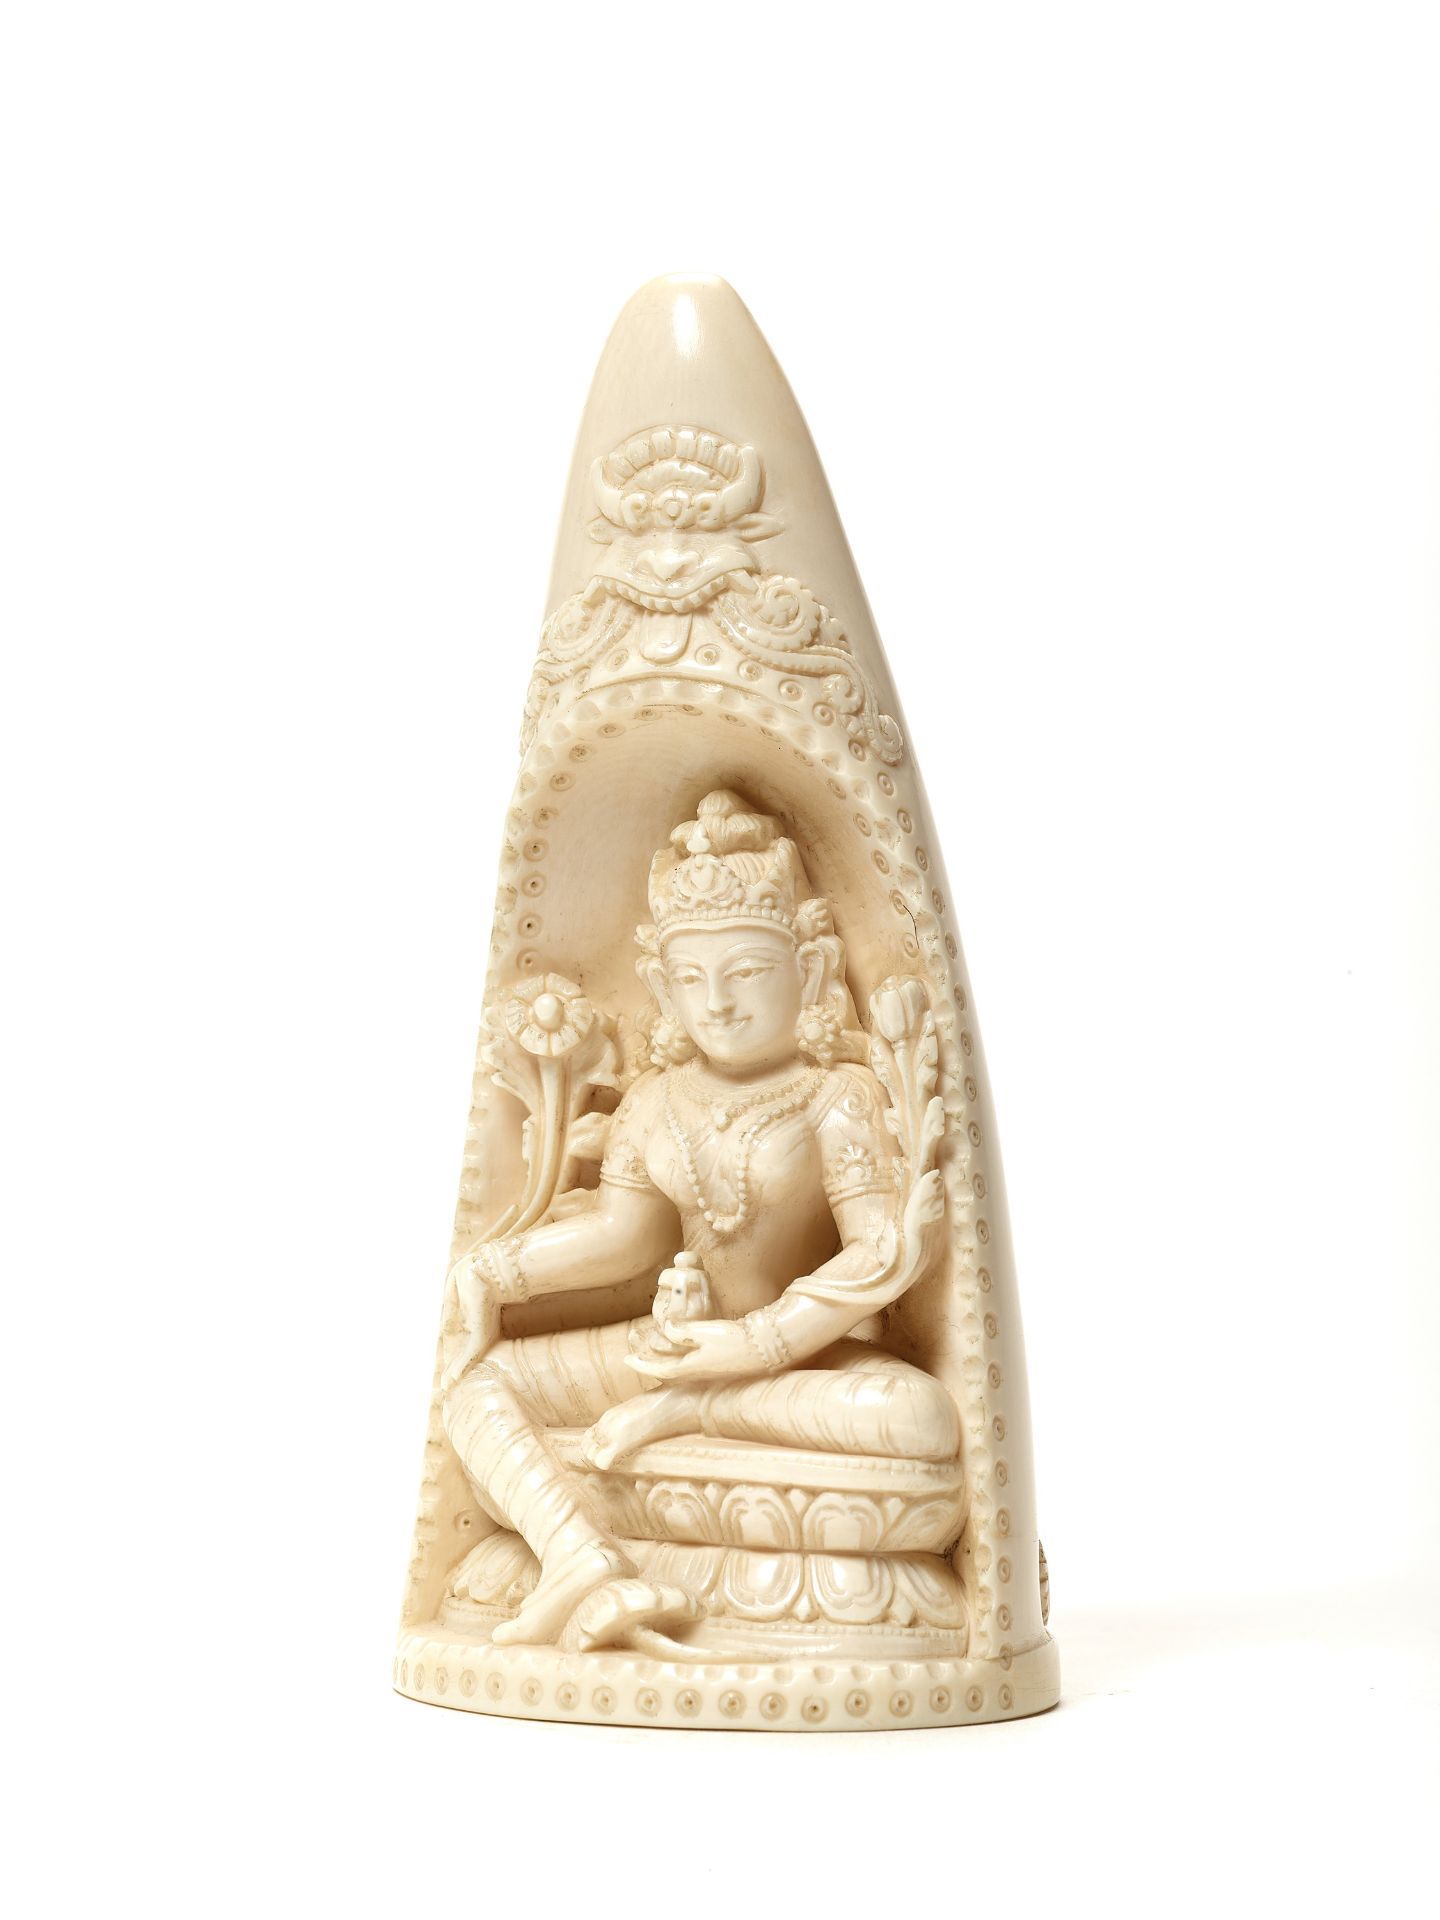 AN INDIAN IVORY TUSK CARVING OF PADMAPANI, 20TH CENTURY - Image 4 of 5